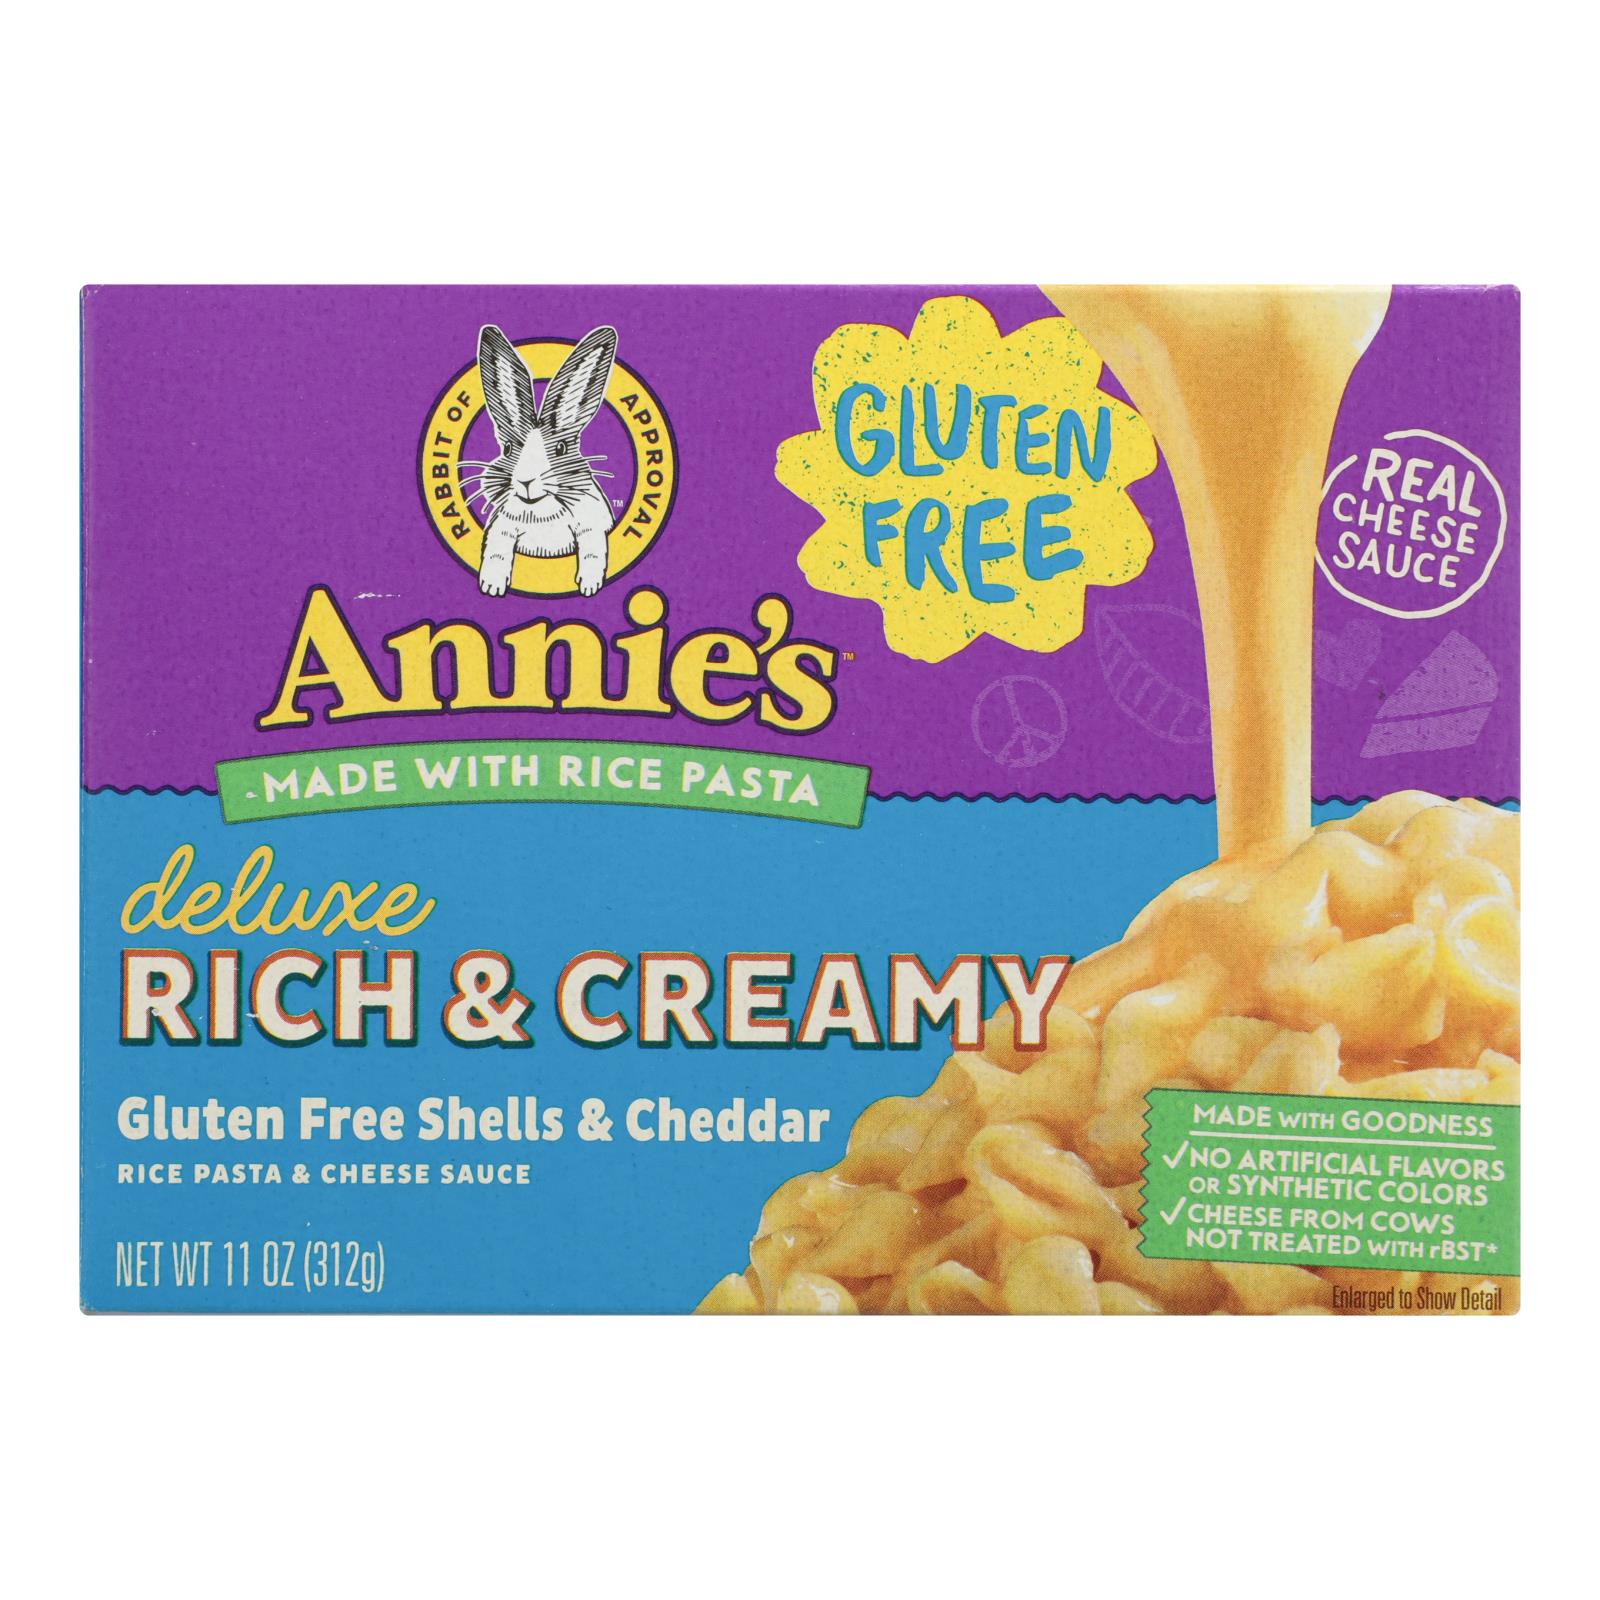 Annie'S Homegrown, Annies Homegrown Rice Pasta Dinner - Creamy Deluxe - Rice Pasta and Extra Cheesy Cheddar Sauce - Gluten Free - 11 oz - case of 12 (Pack of 12)